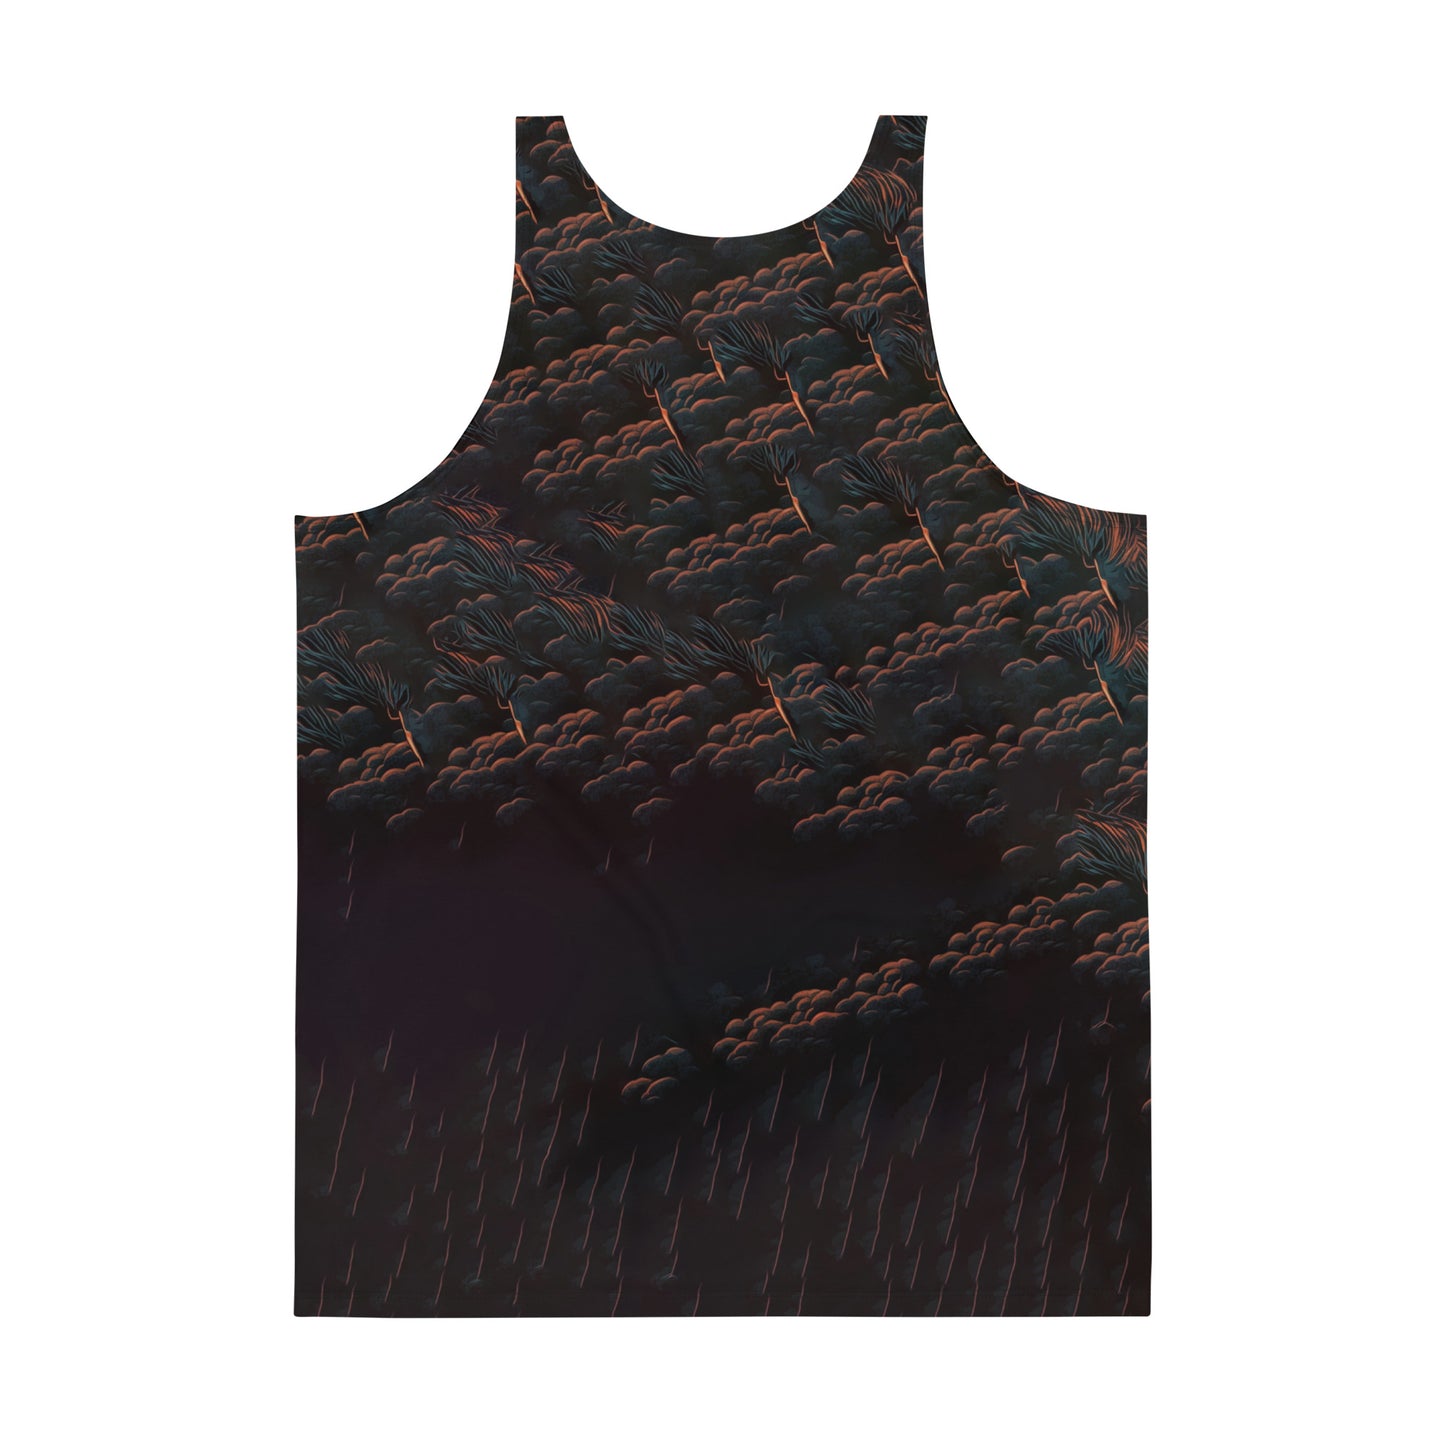 March Mad Ness V7 - Unisex Tank Top